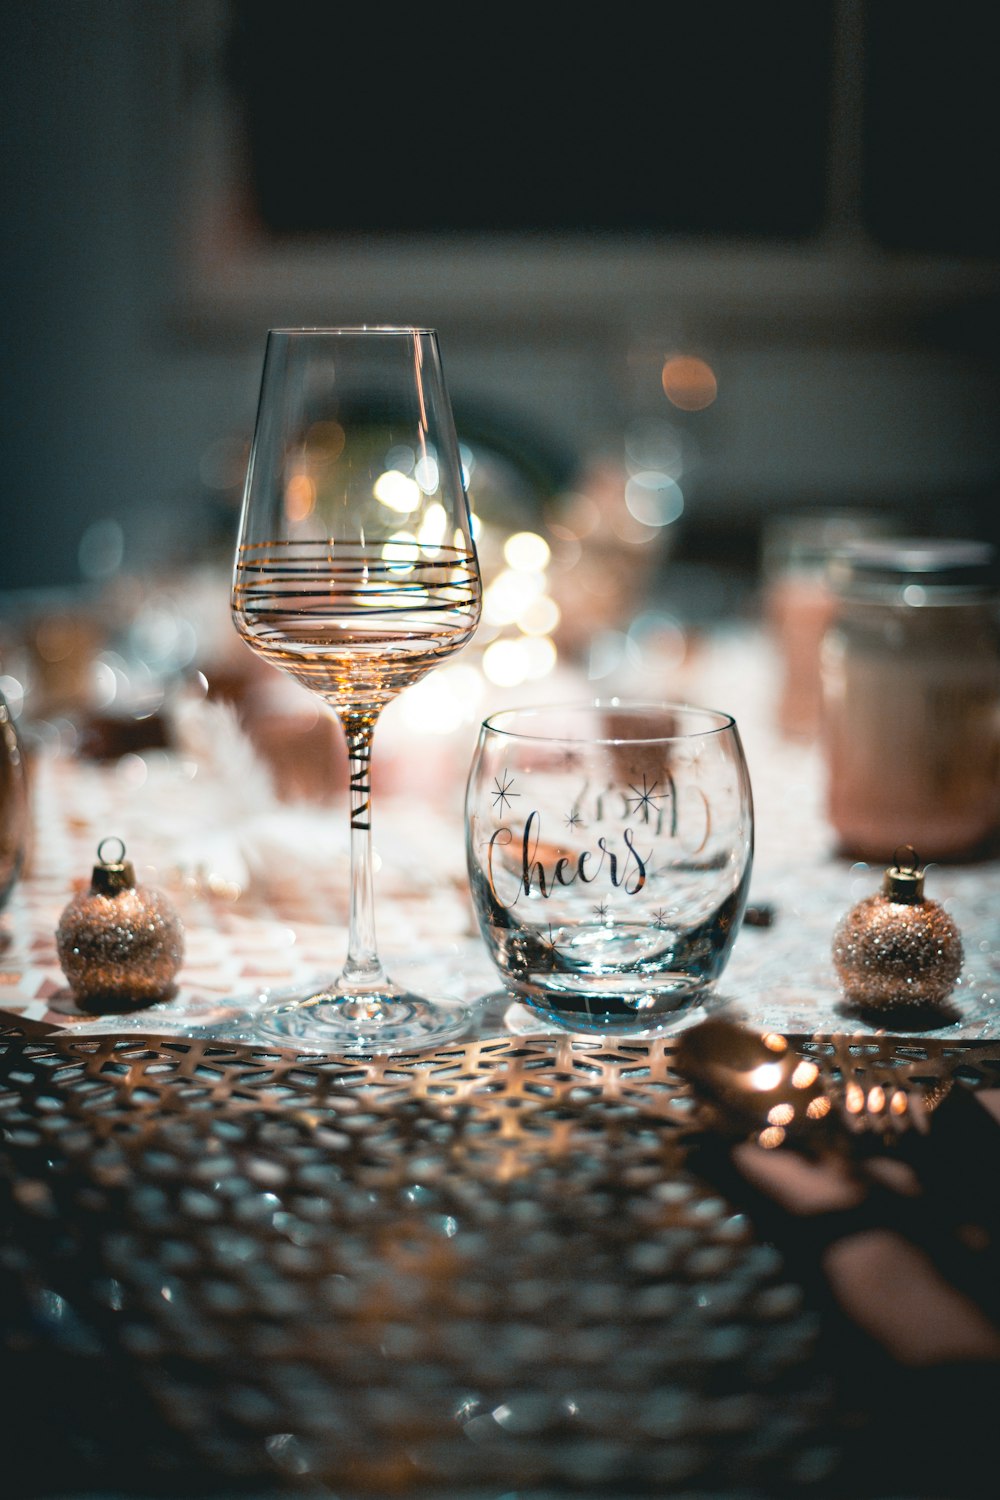 selective focus photography of wine glass